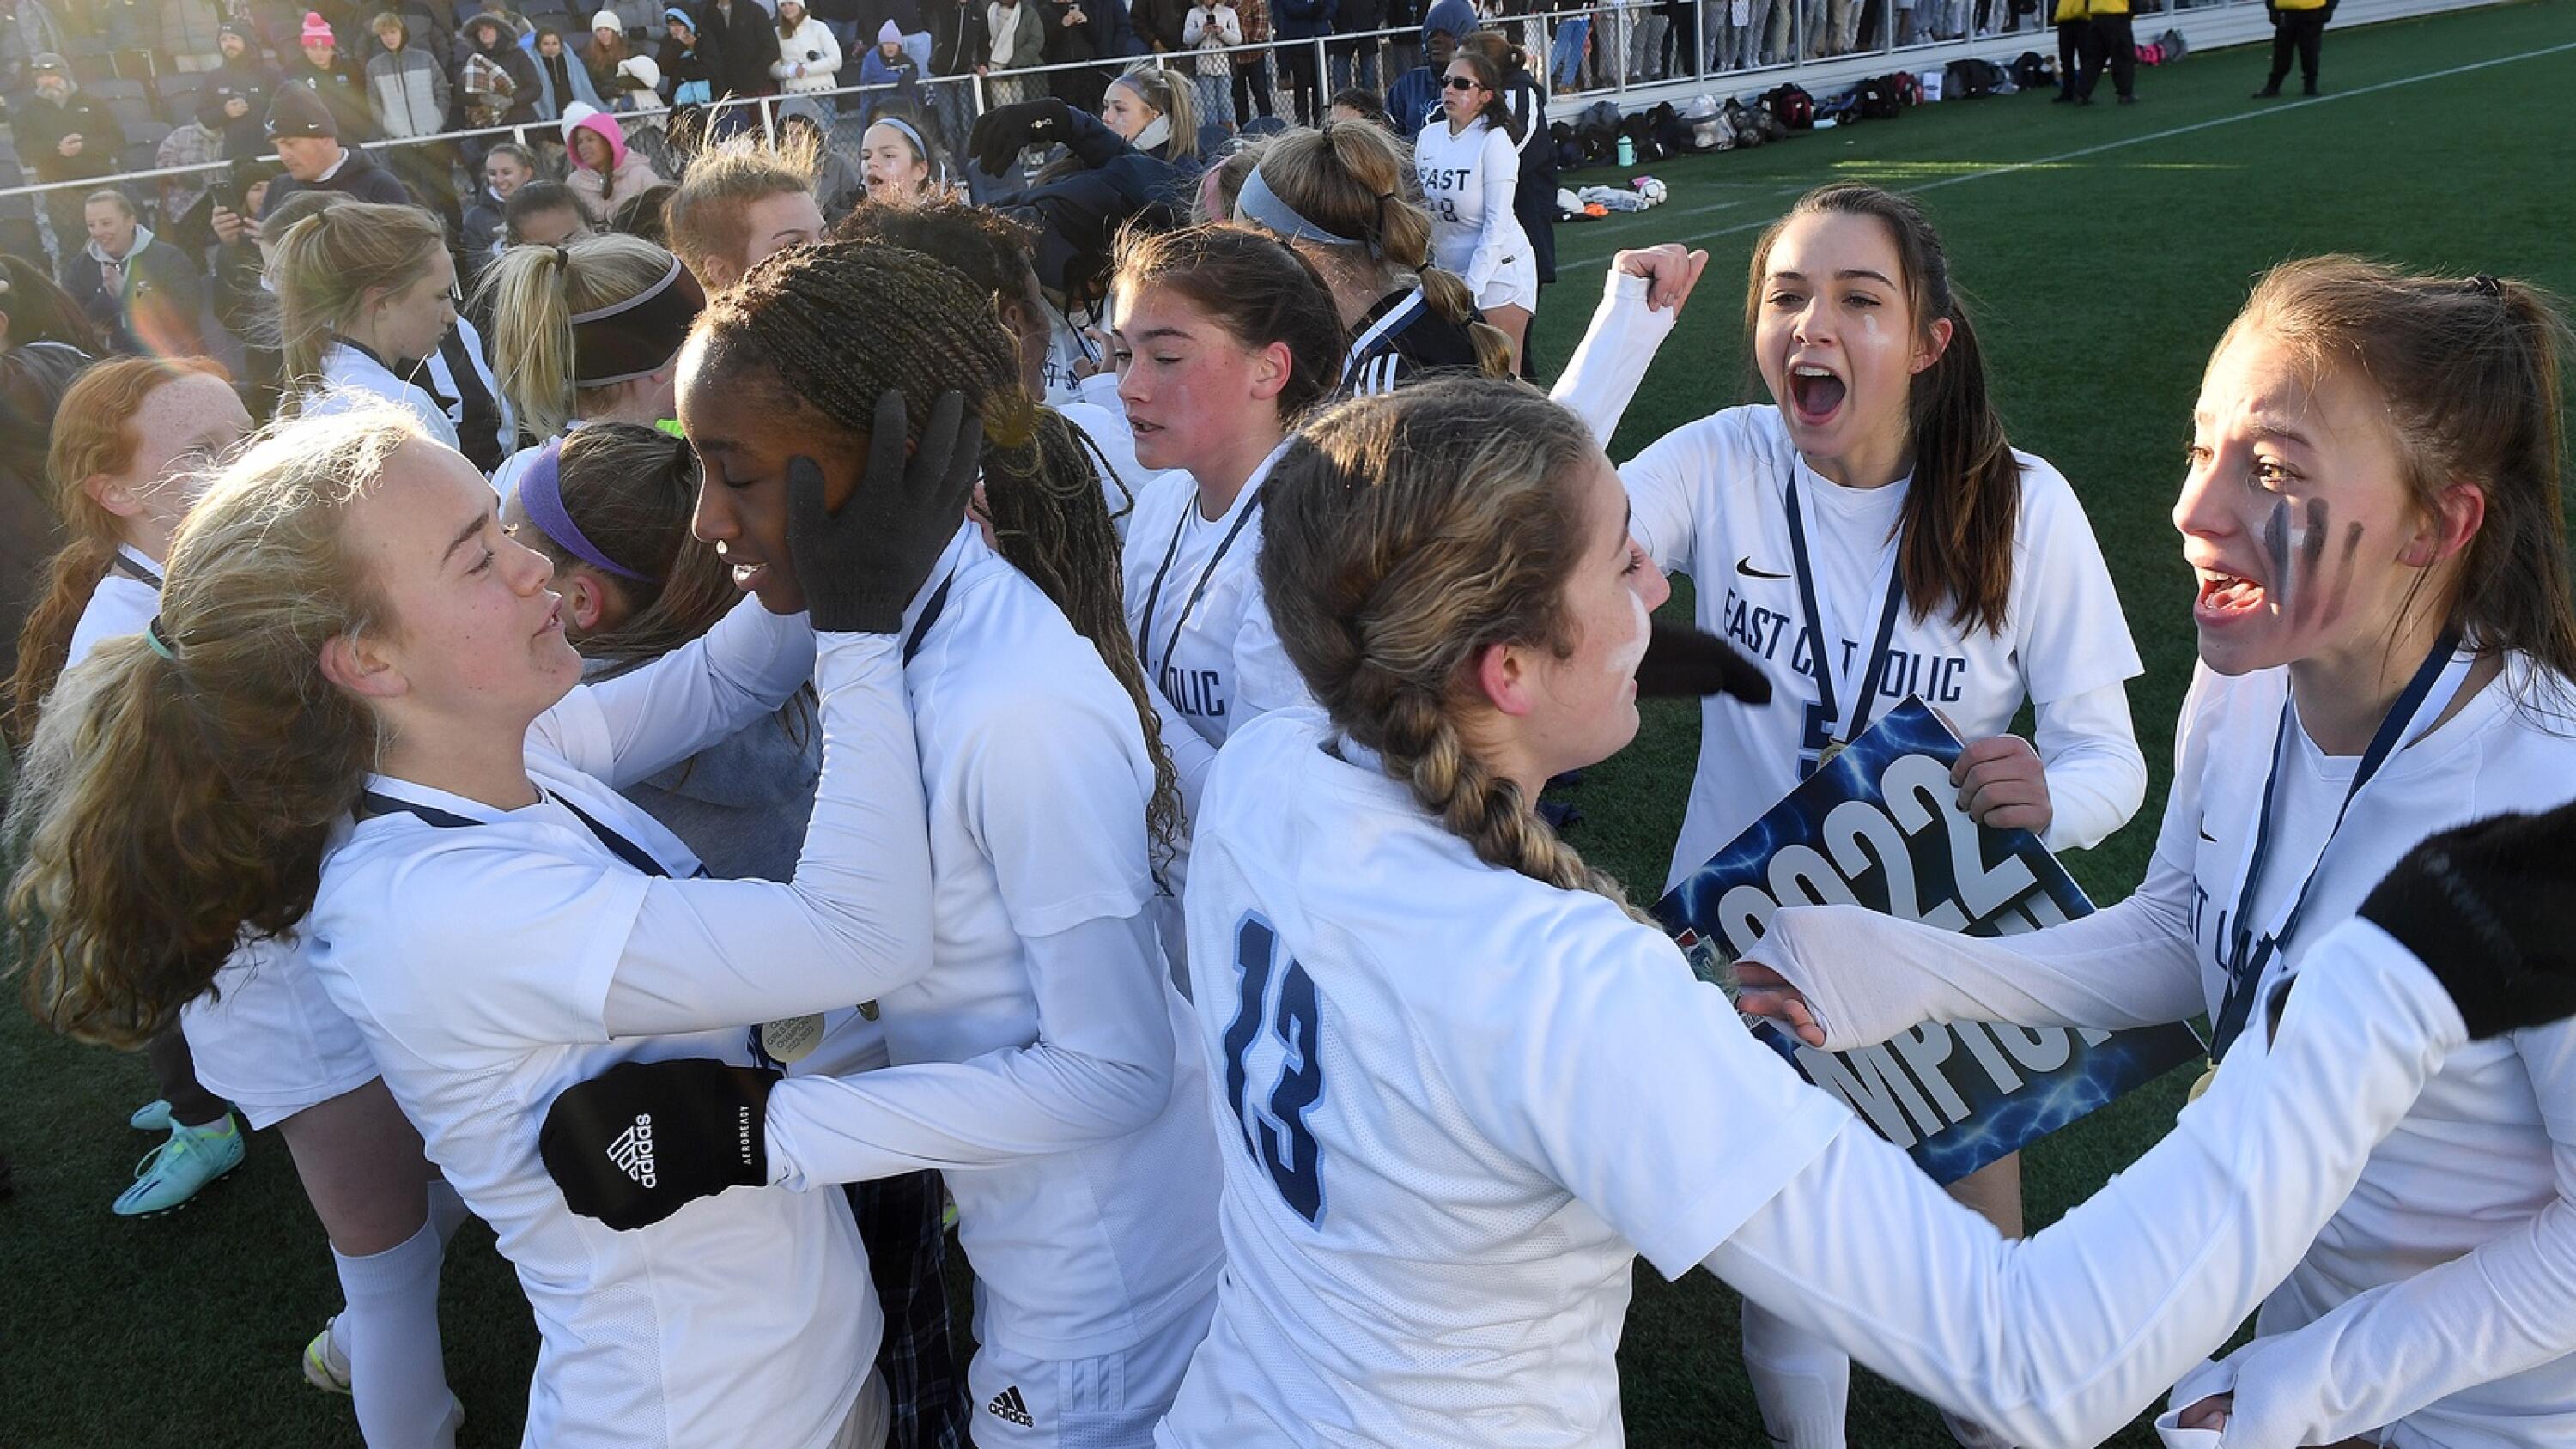 East Catholic tops Lyman Memorial in Class S girls soccer championships 